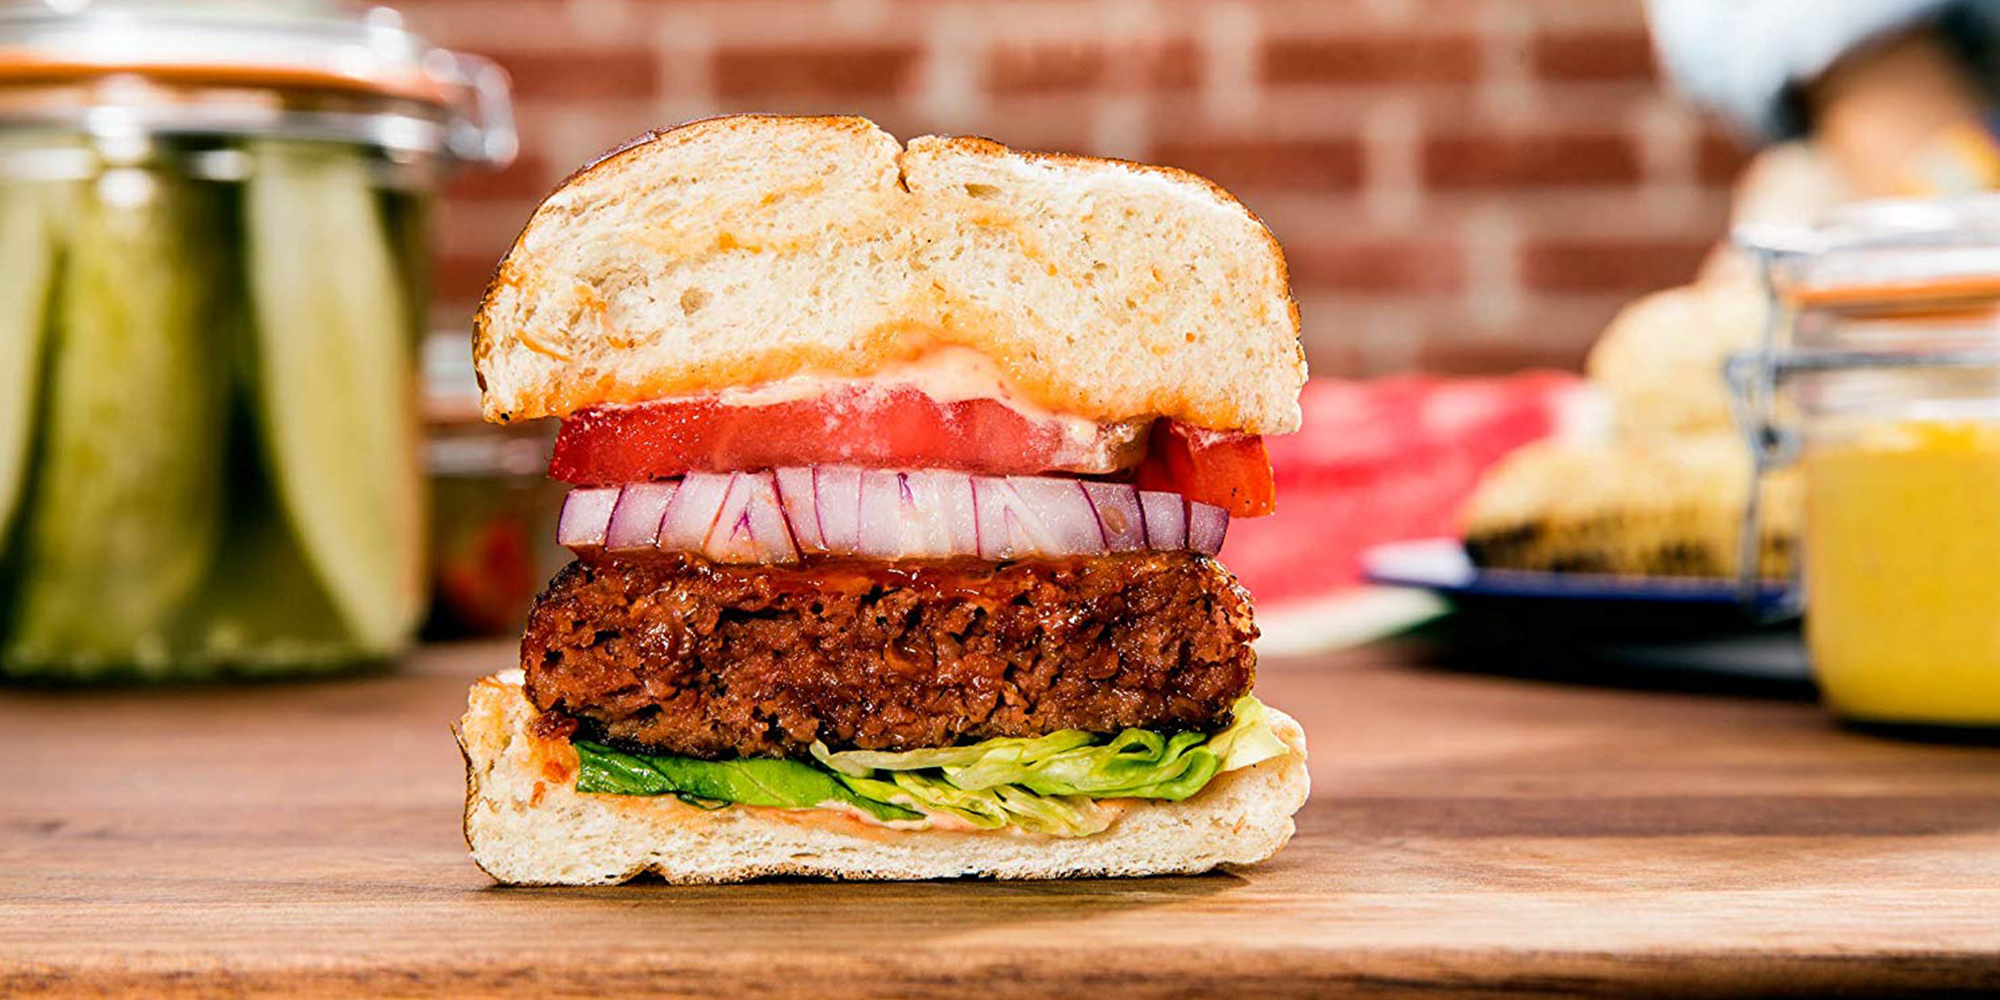 Is The Beyond Burger Healthy? Registered Dietitians Weigh In